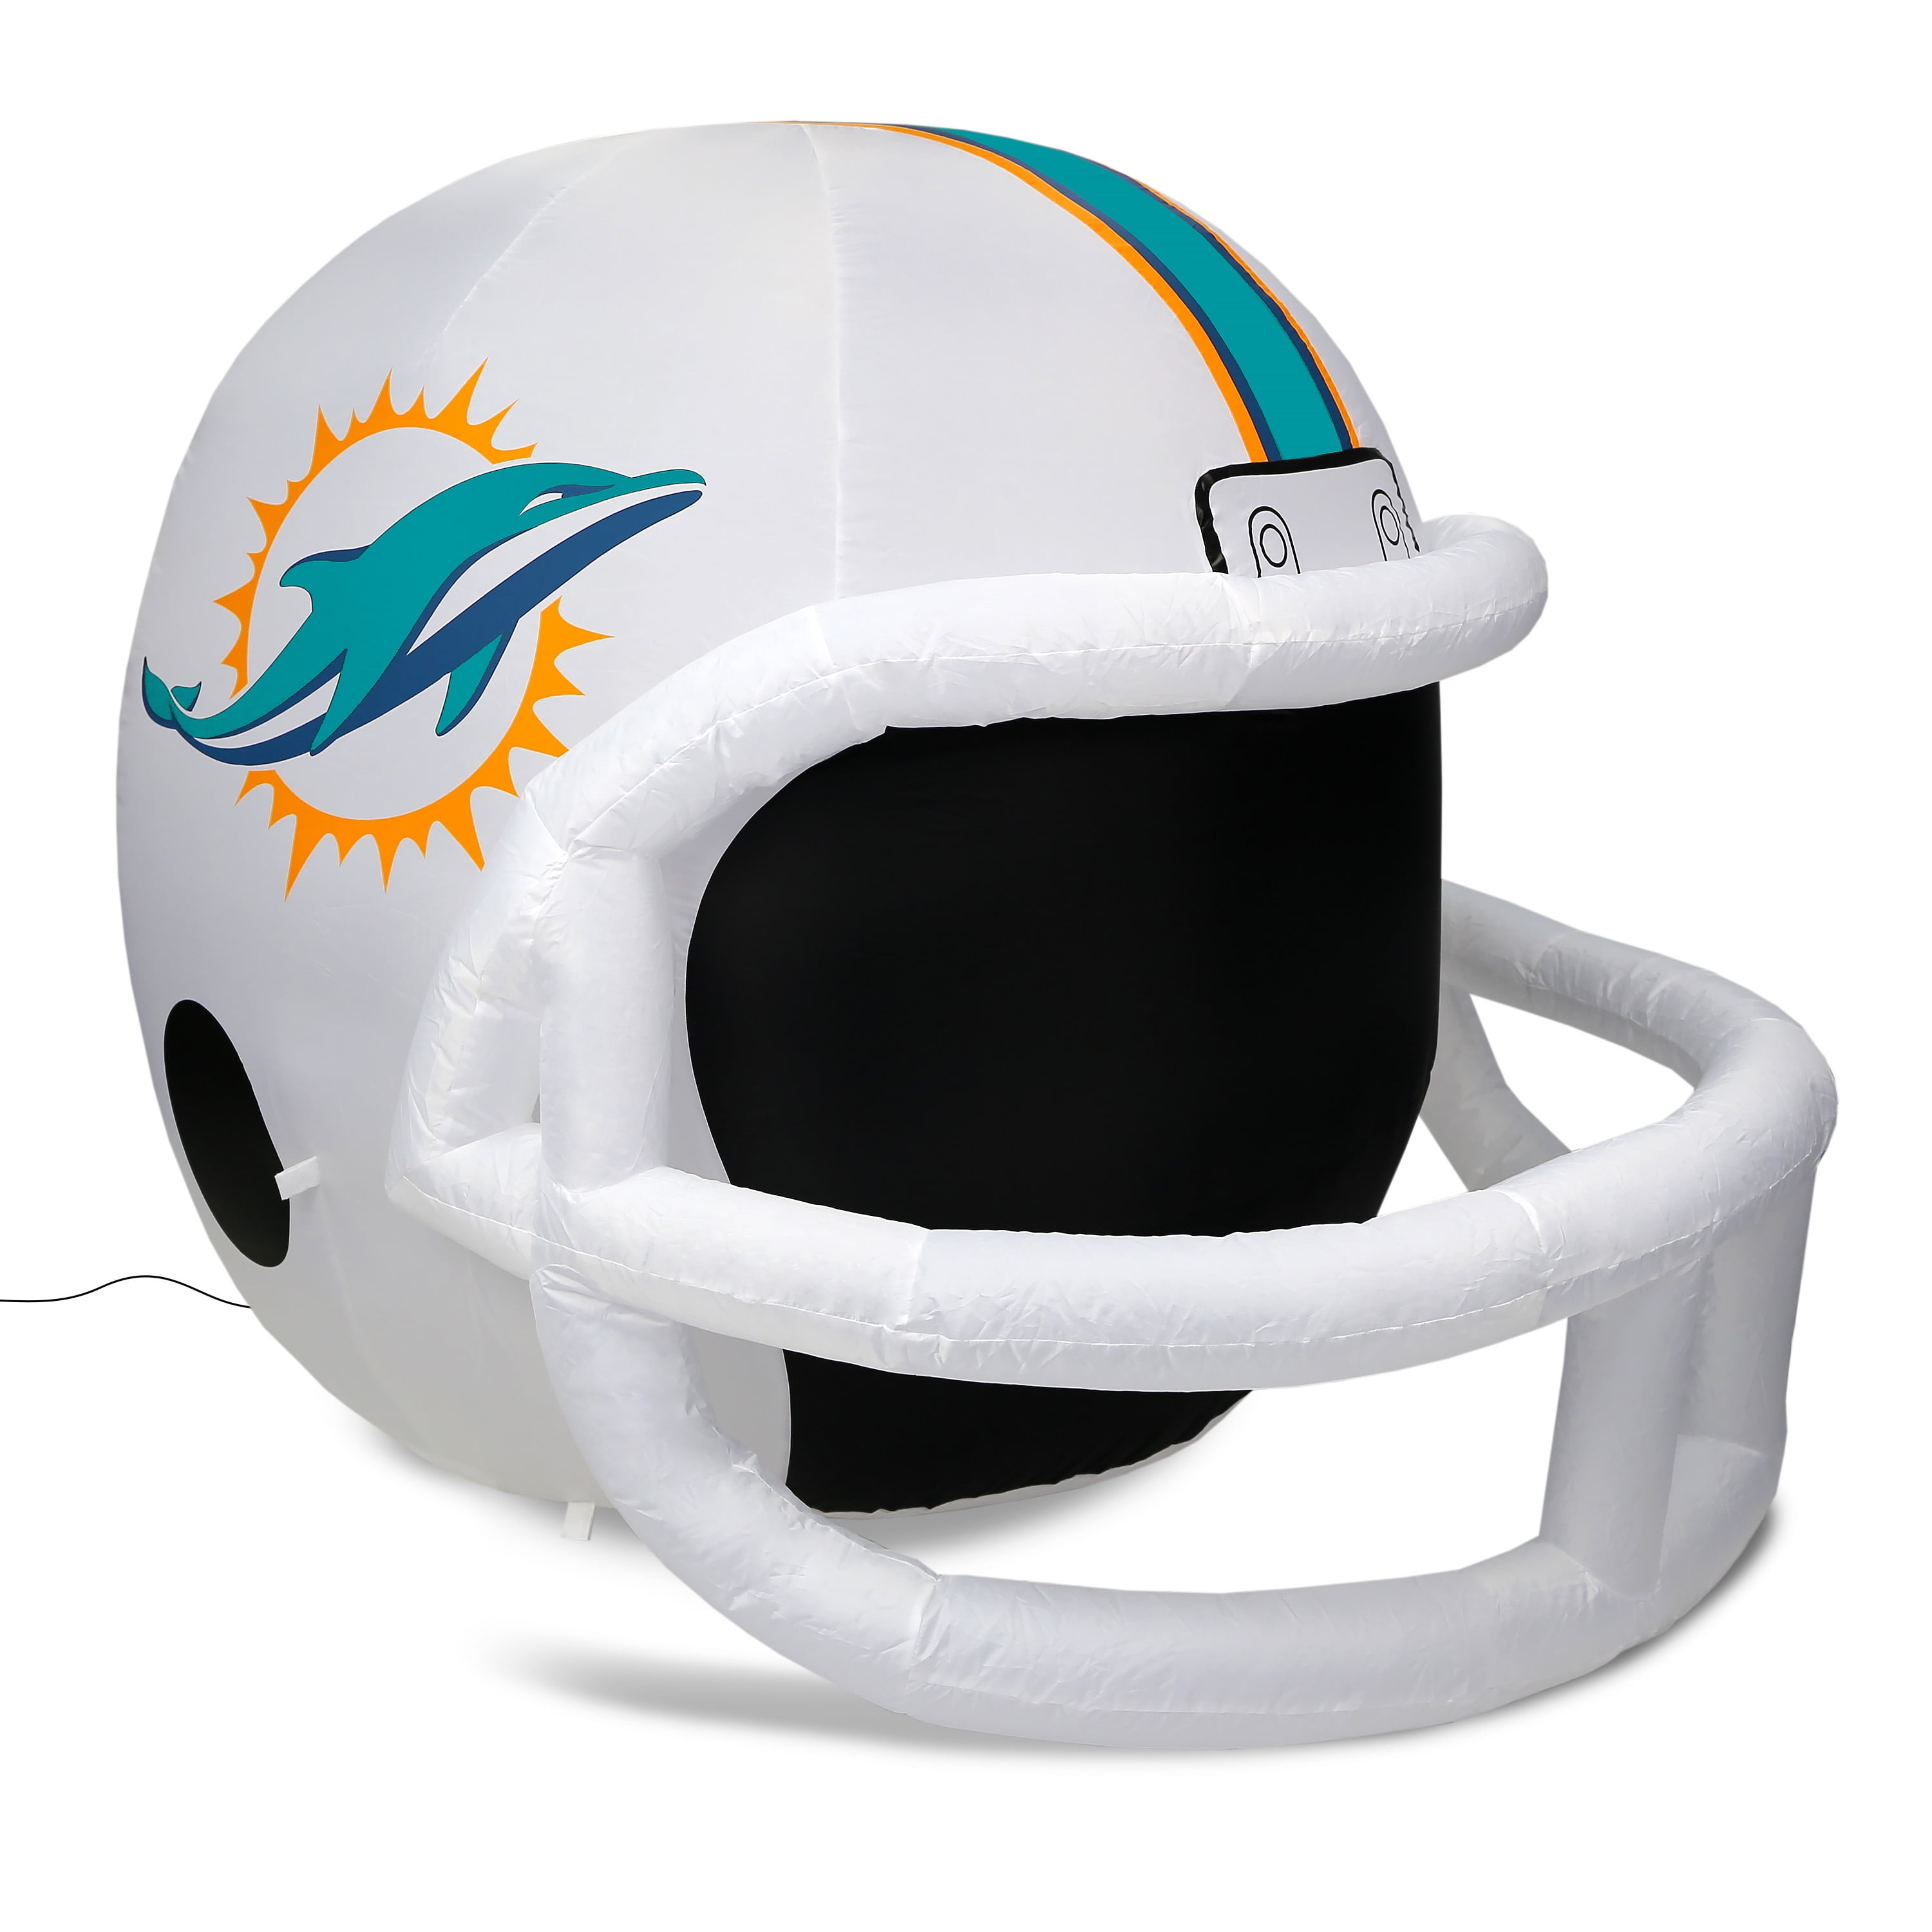 NFL Miami Dolphins Team Inflatable Lawn Helmet, White, One Size 